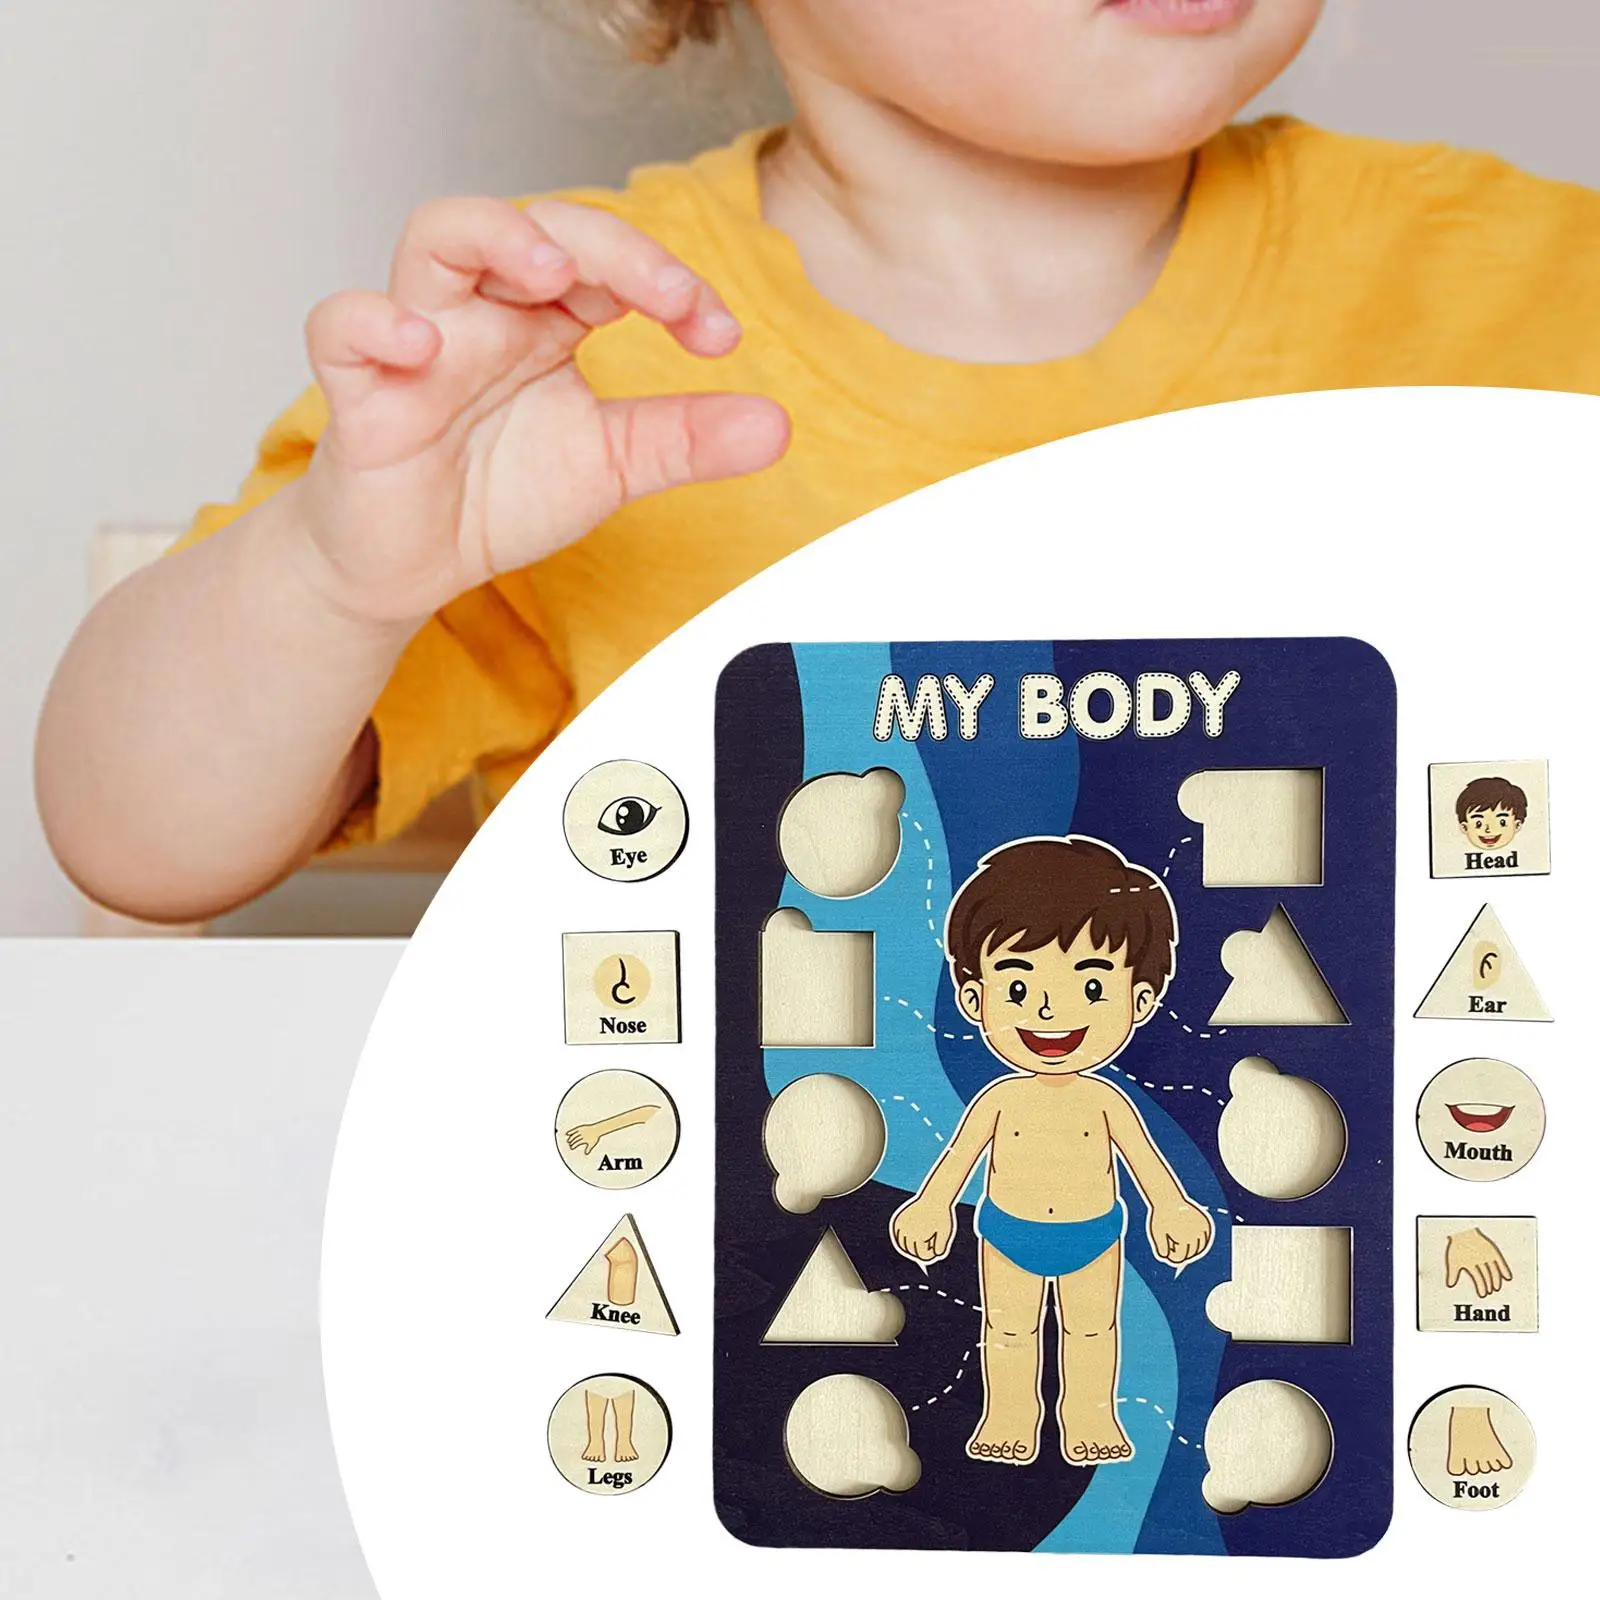 Learning Human Body Parts Body Puzzle for kids Learning Activities Wood Peg Puzzle Game for Kids for Birthday Gift Kids